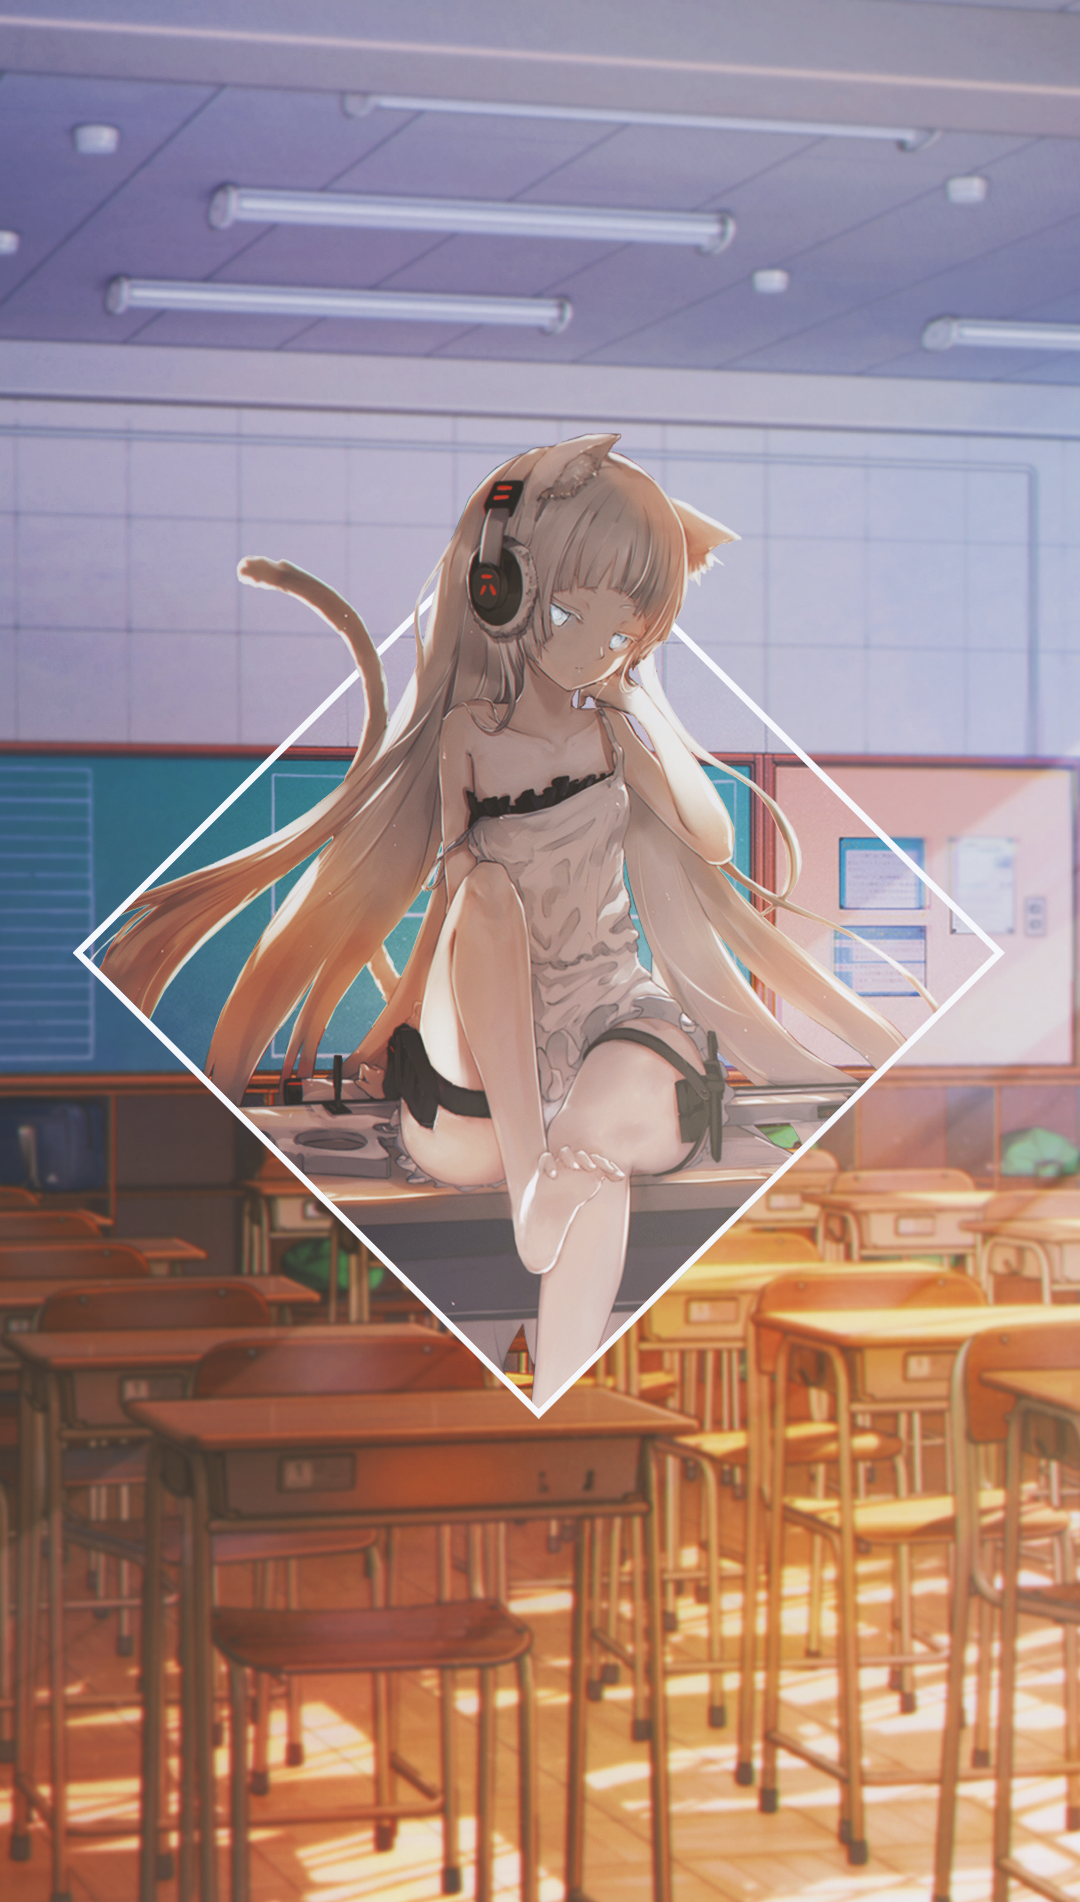 Anime 1080x1902 anime anime girls picture-in-picture headphones school animal ears barefoot